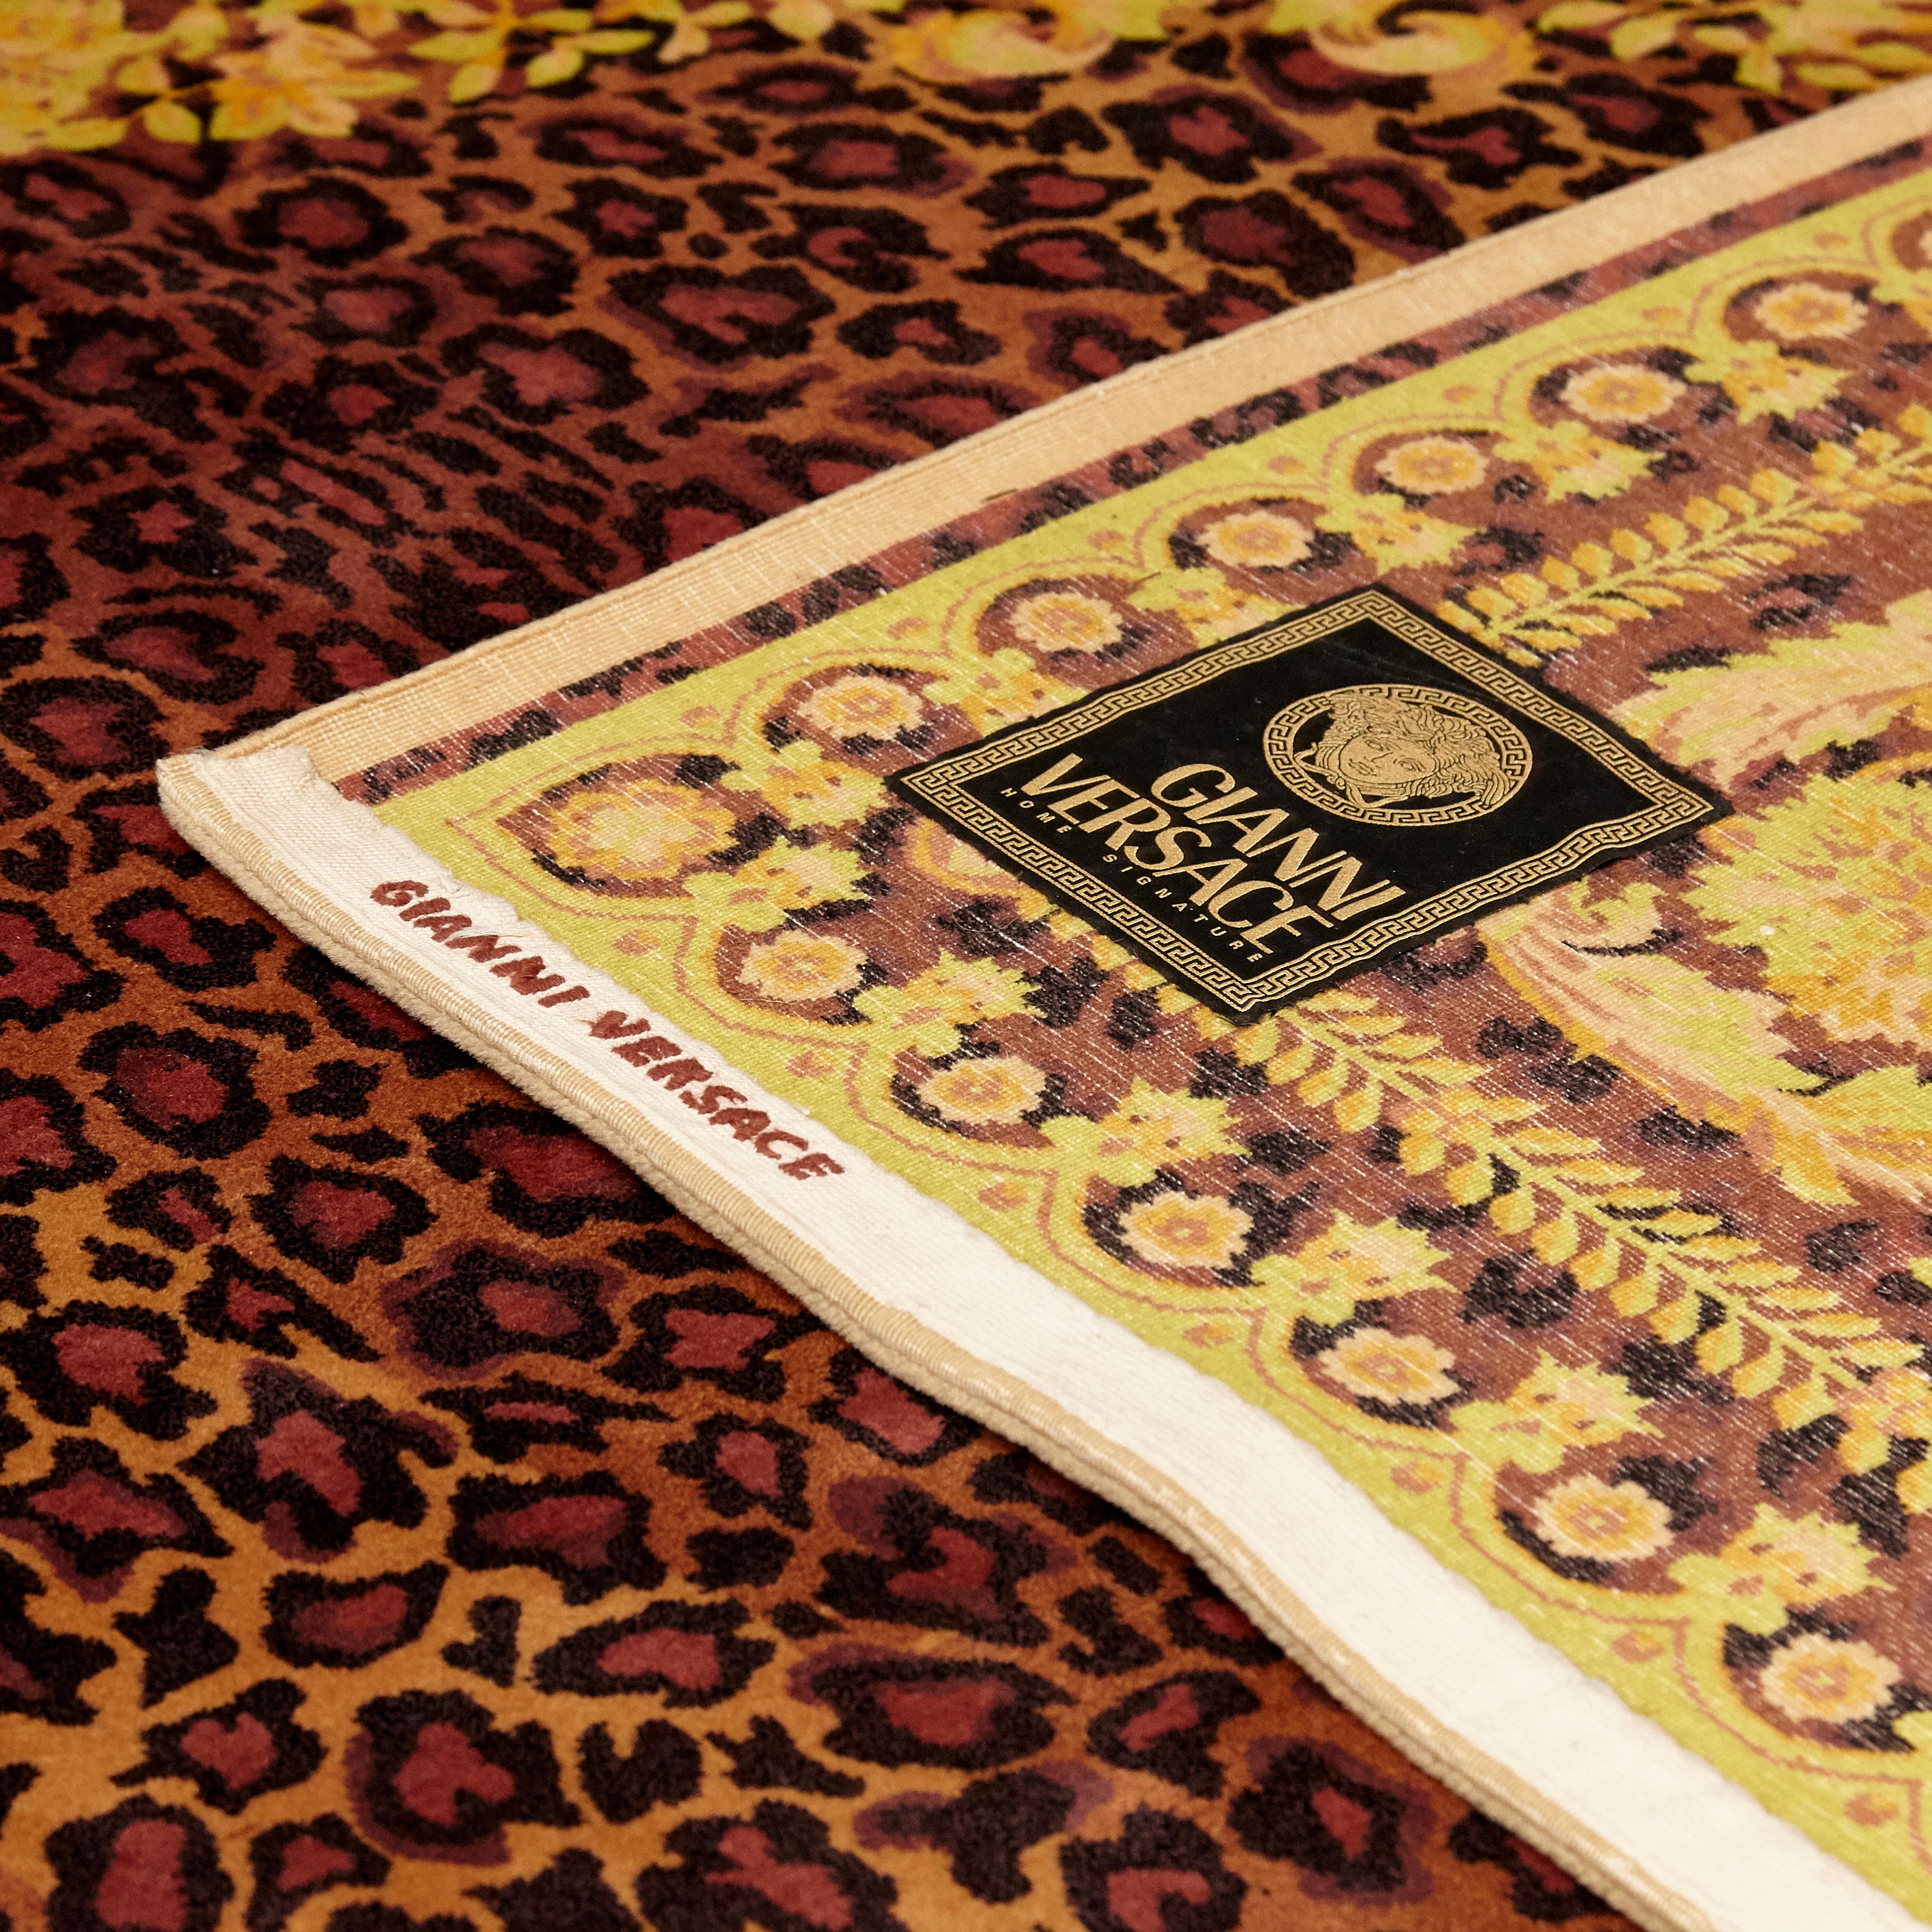 Gianni Versace Collection Rug Wild Barocco, Gold Leopard Animal Print, 1980 9